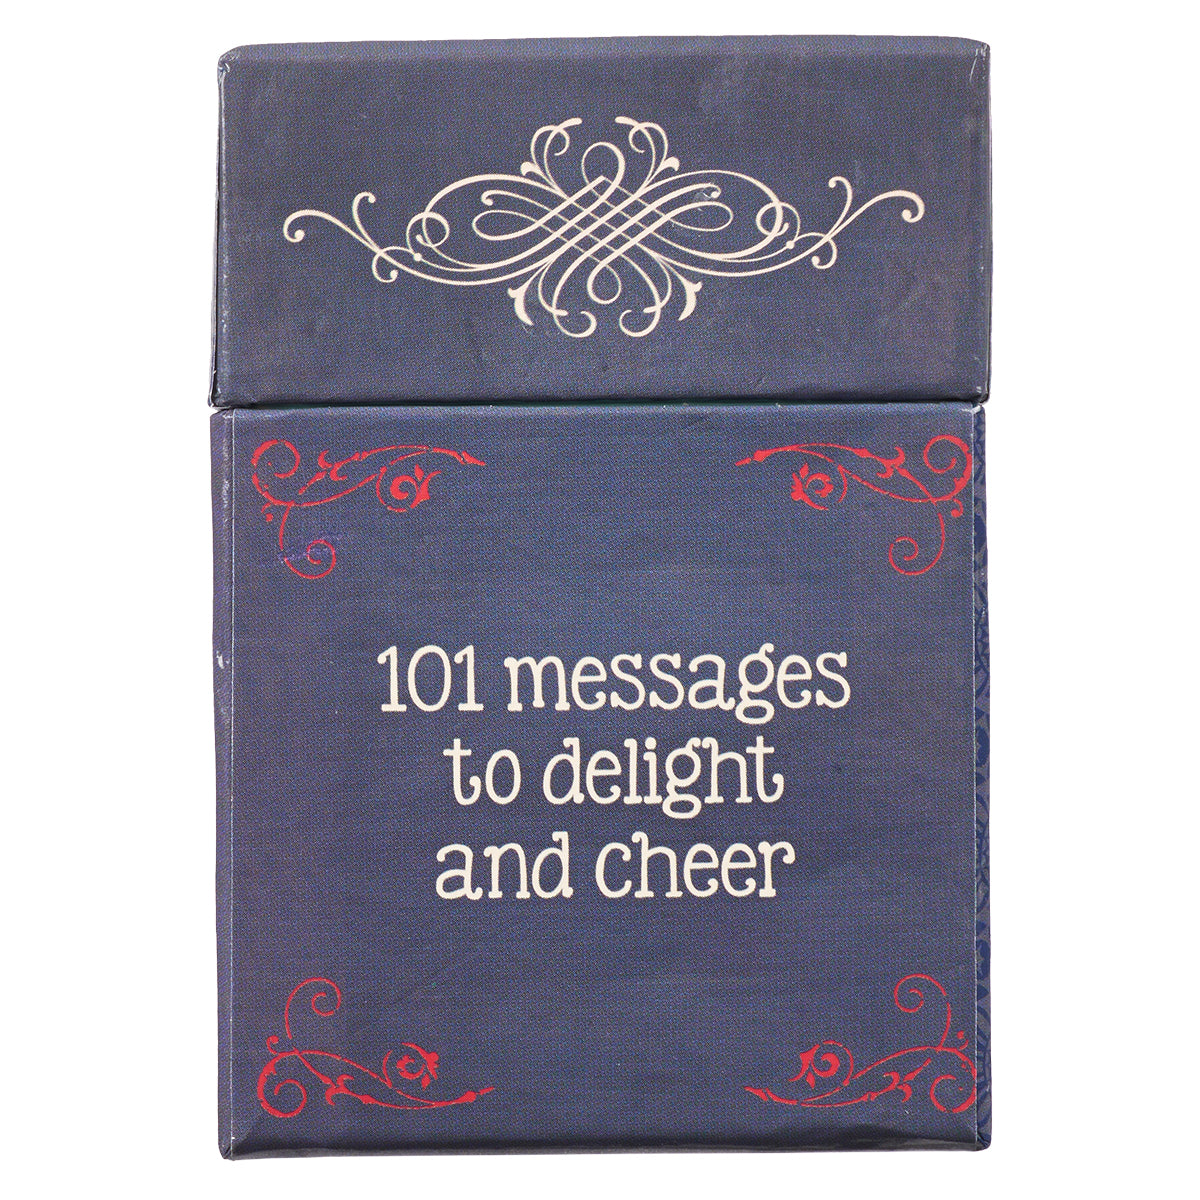 Image of 101 Blessings of Joy other